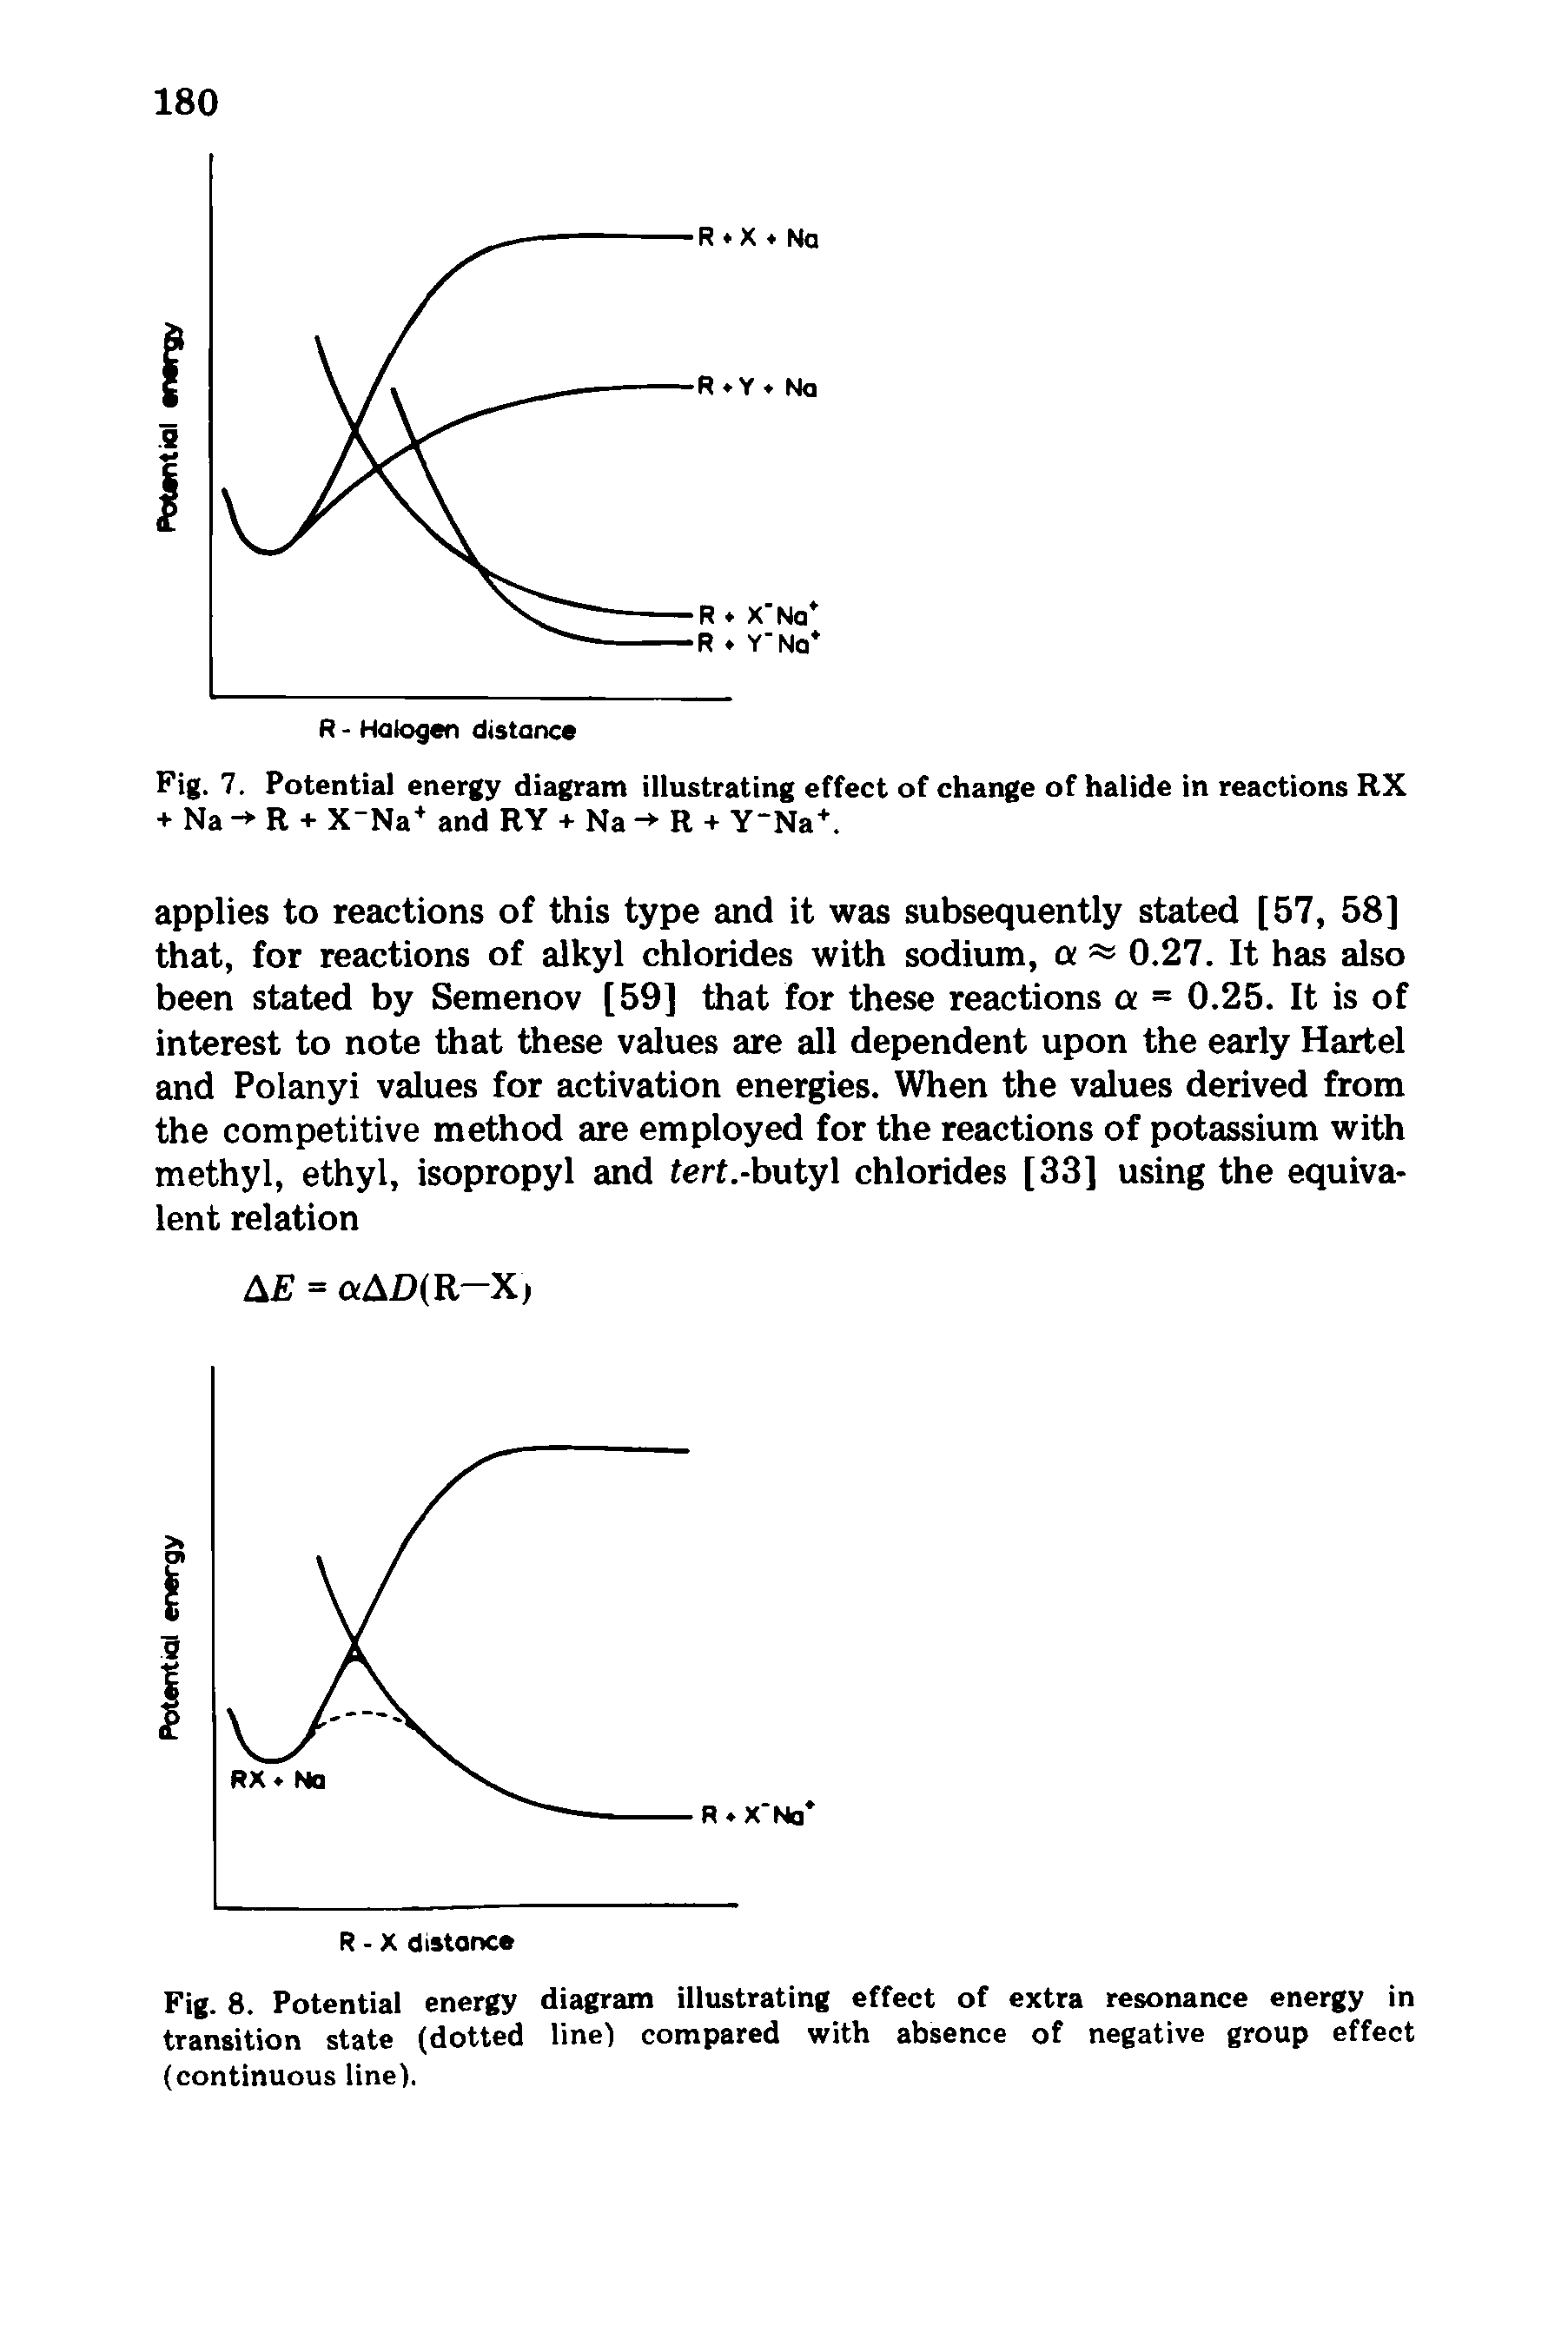 Fig. 8. Potential energy diagram illustrating effect of extra resonance energy in transition state (dotted line) compared with absence of negative group effect (continuous line).